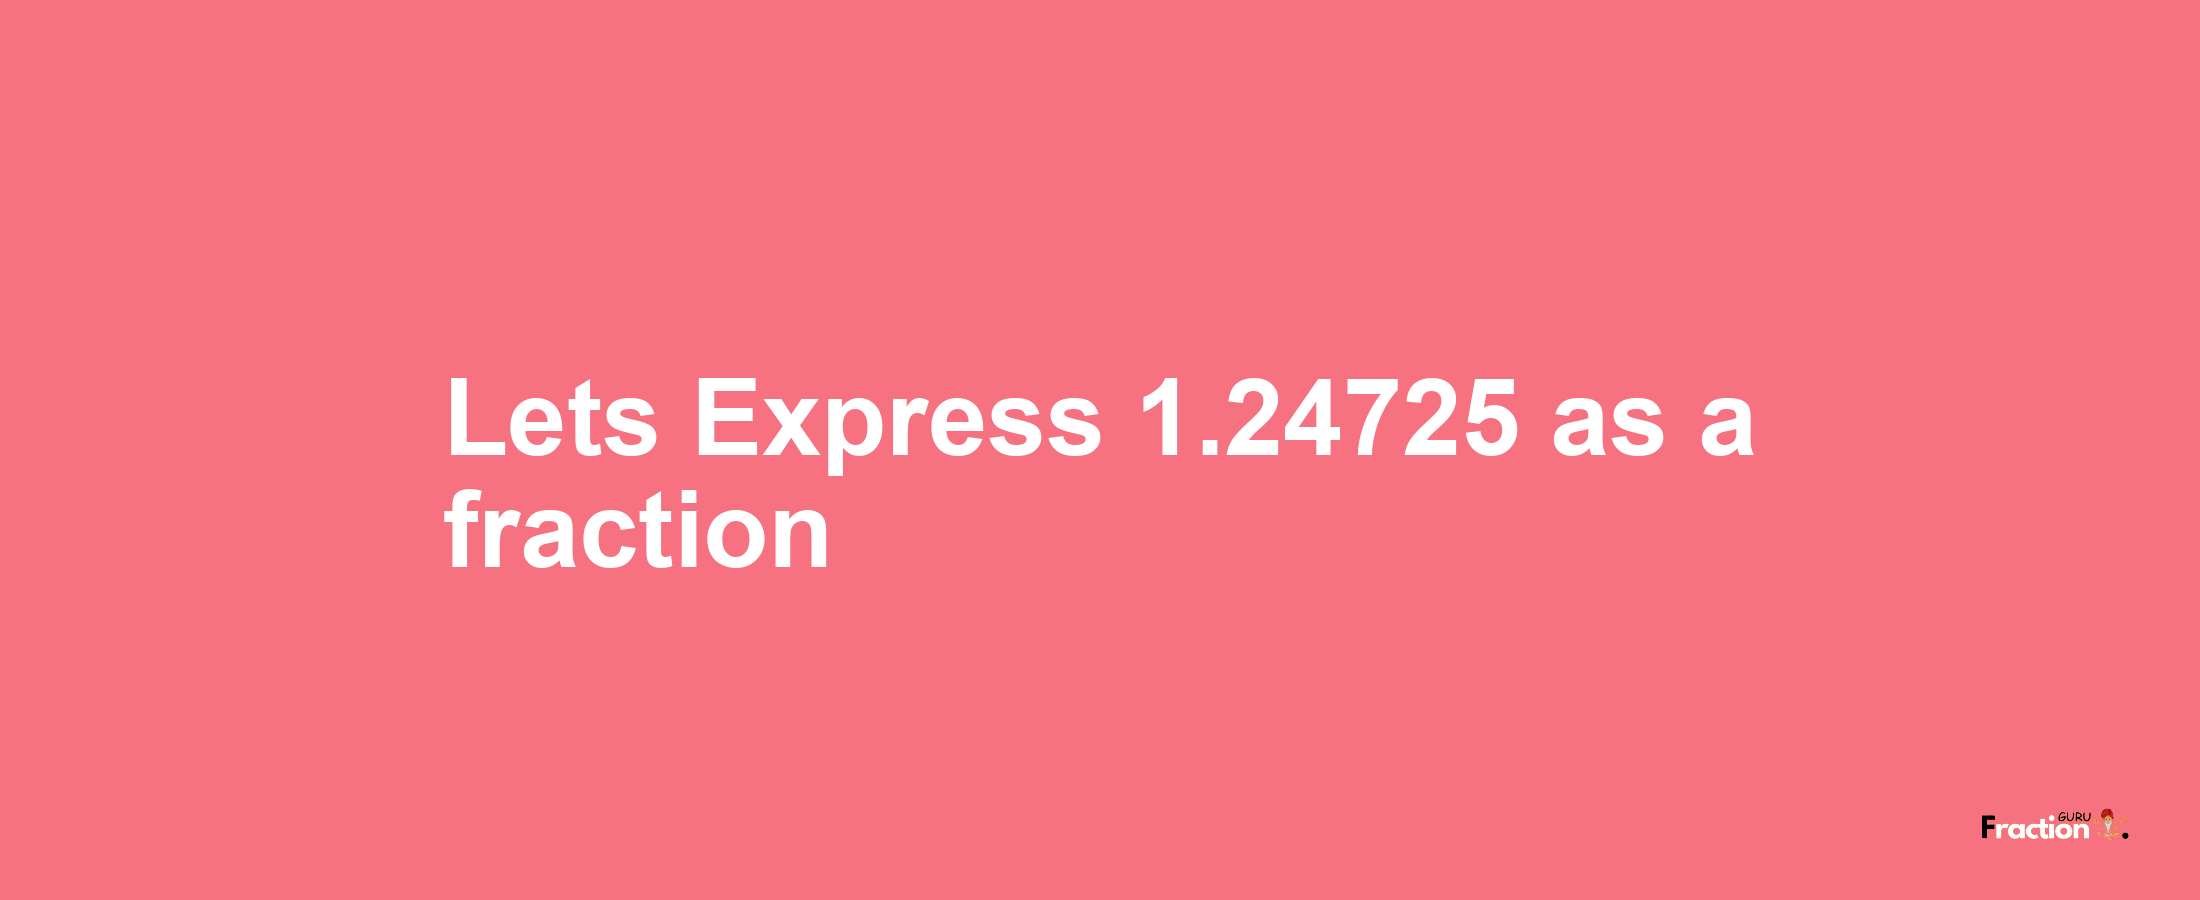 Lets Express 1.24725 as afraction